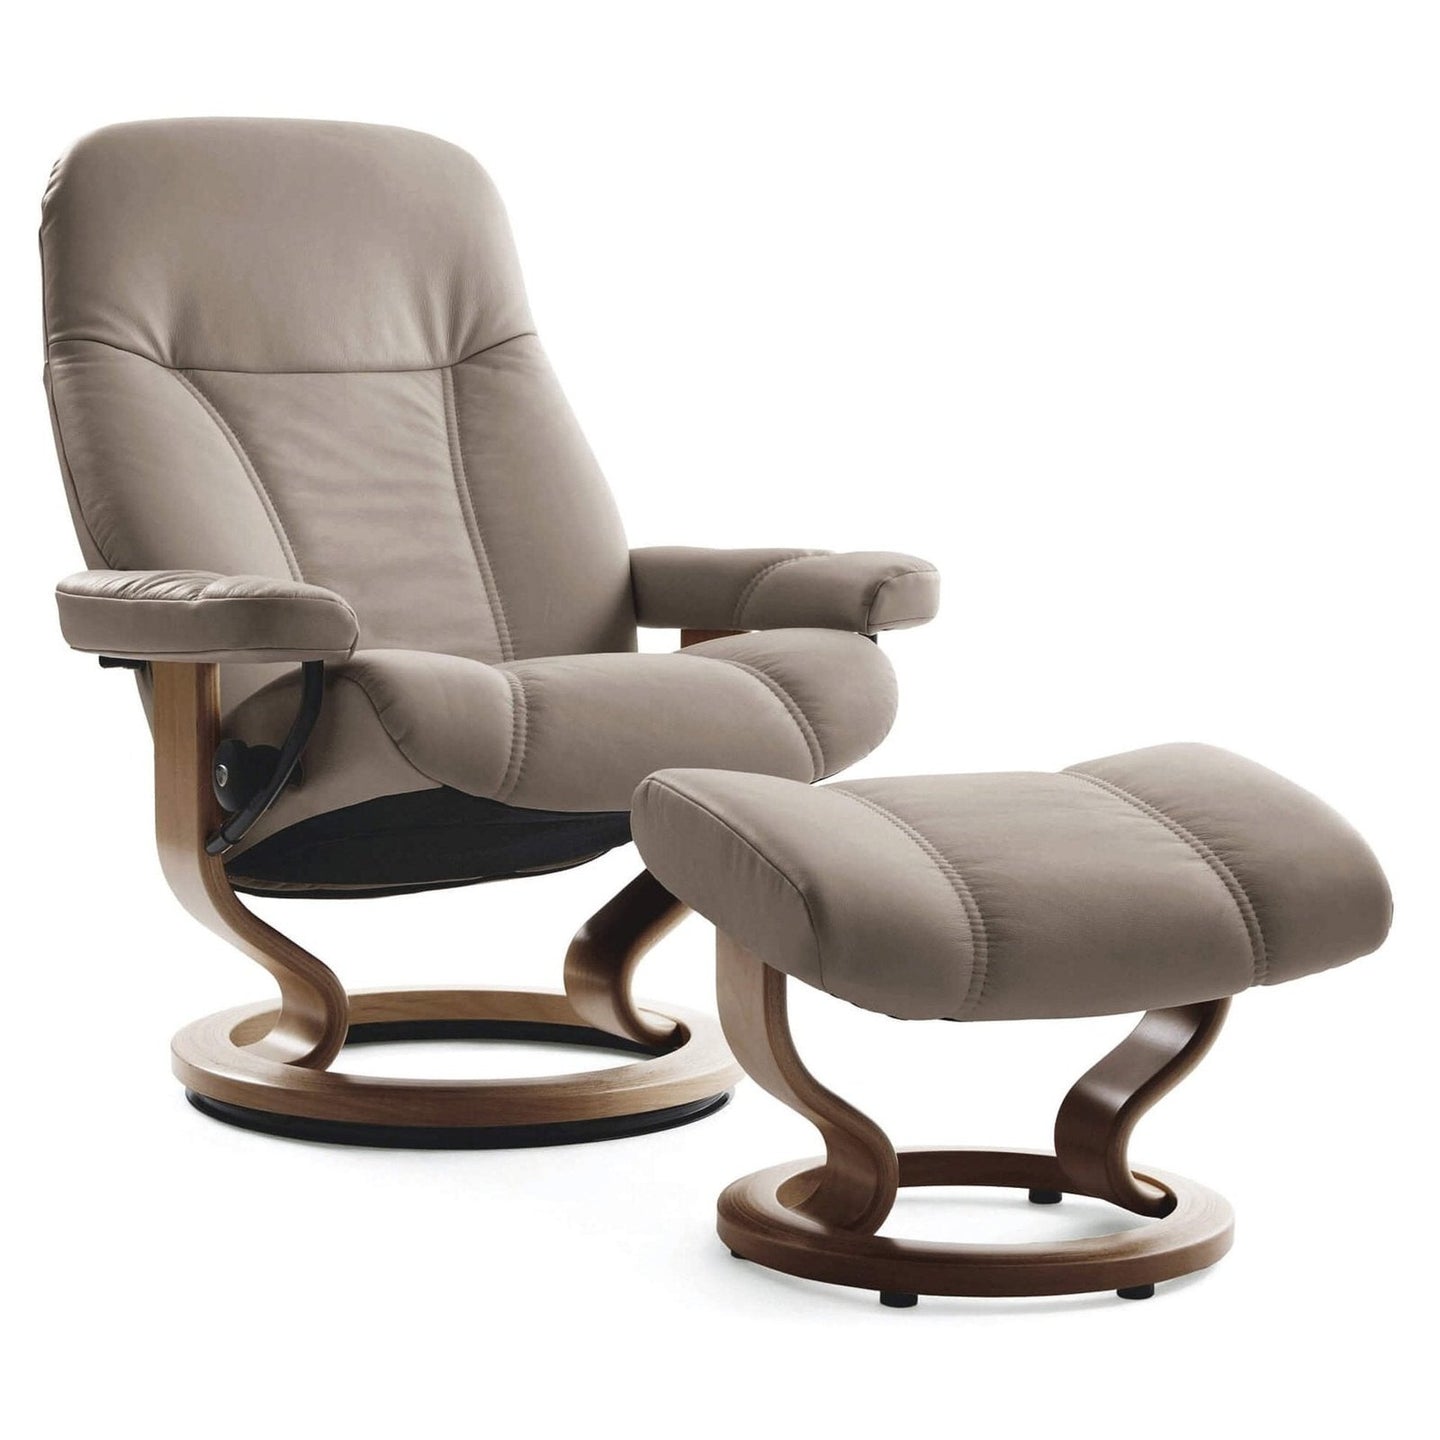 Stressless Consul Large Recliner Chair - Hunter Furnishing